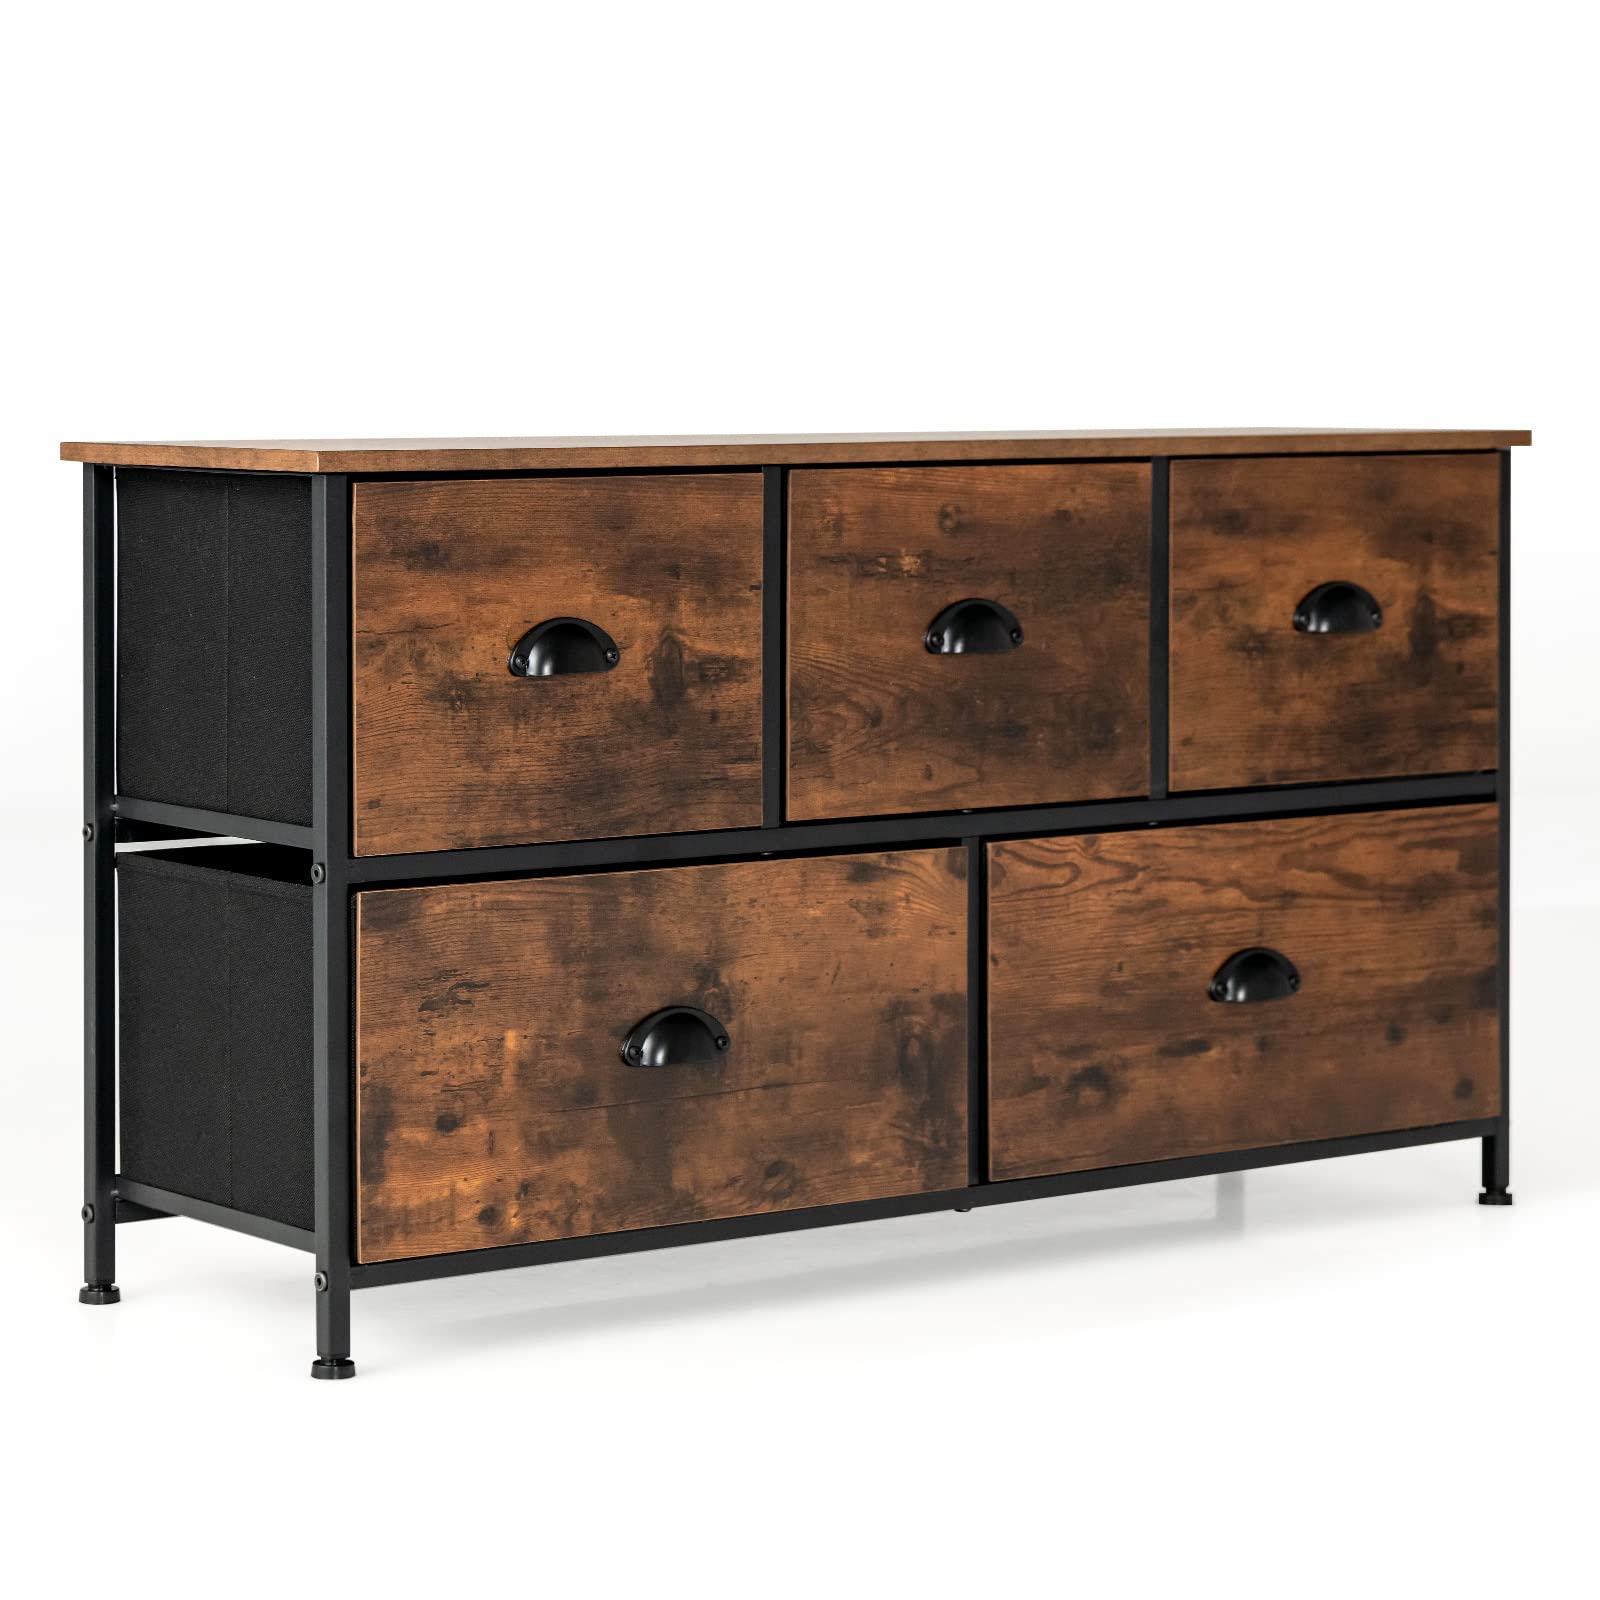 Giantex Dresser for Bedroom, Chest of Drawers with Wood Top Retro Storage Cabinet